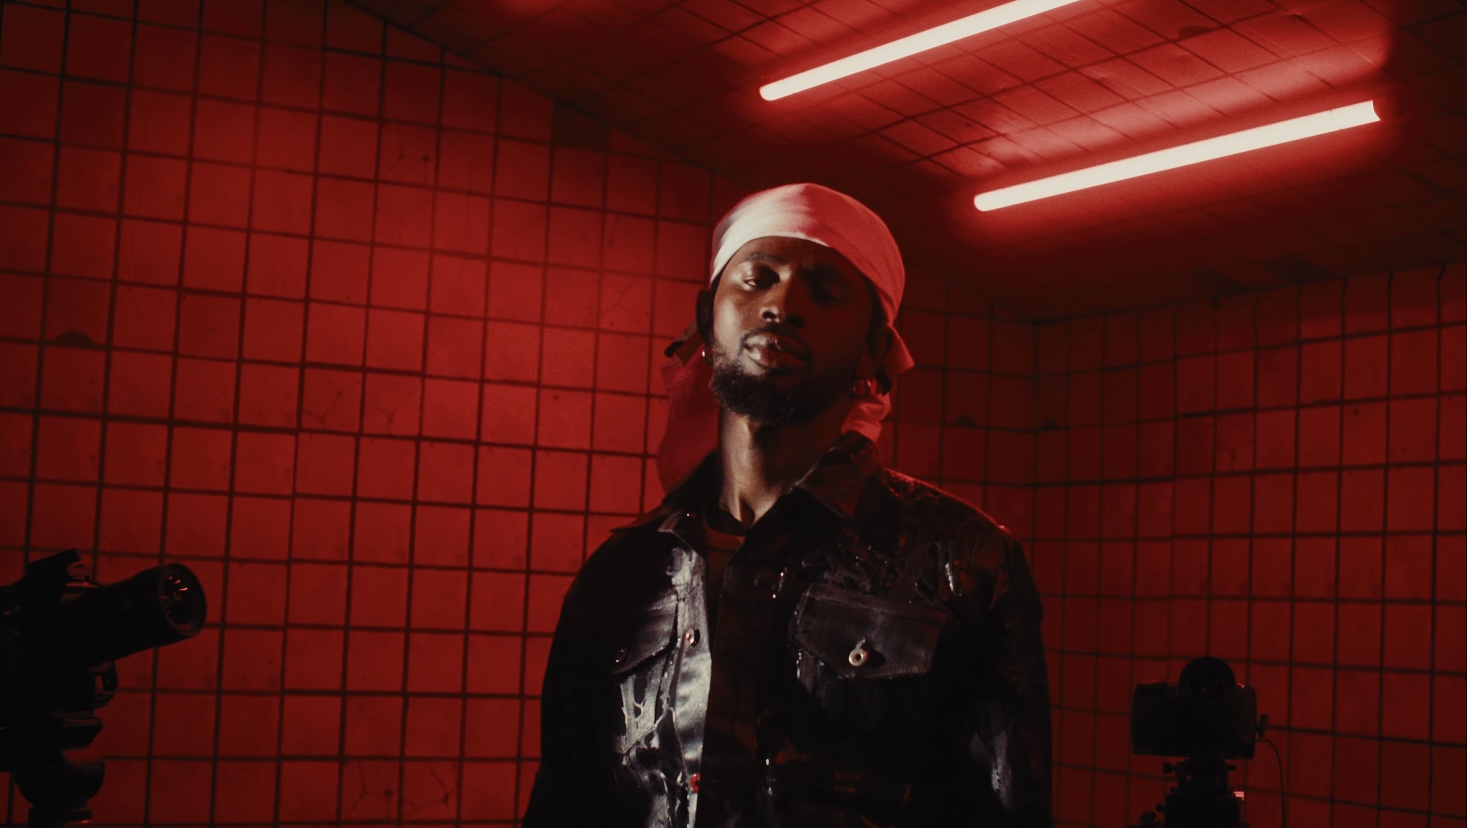 Stills from Black Sherif’s Video for “January 9th”